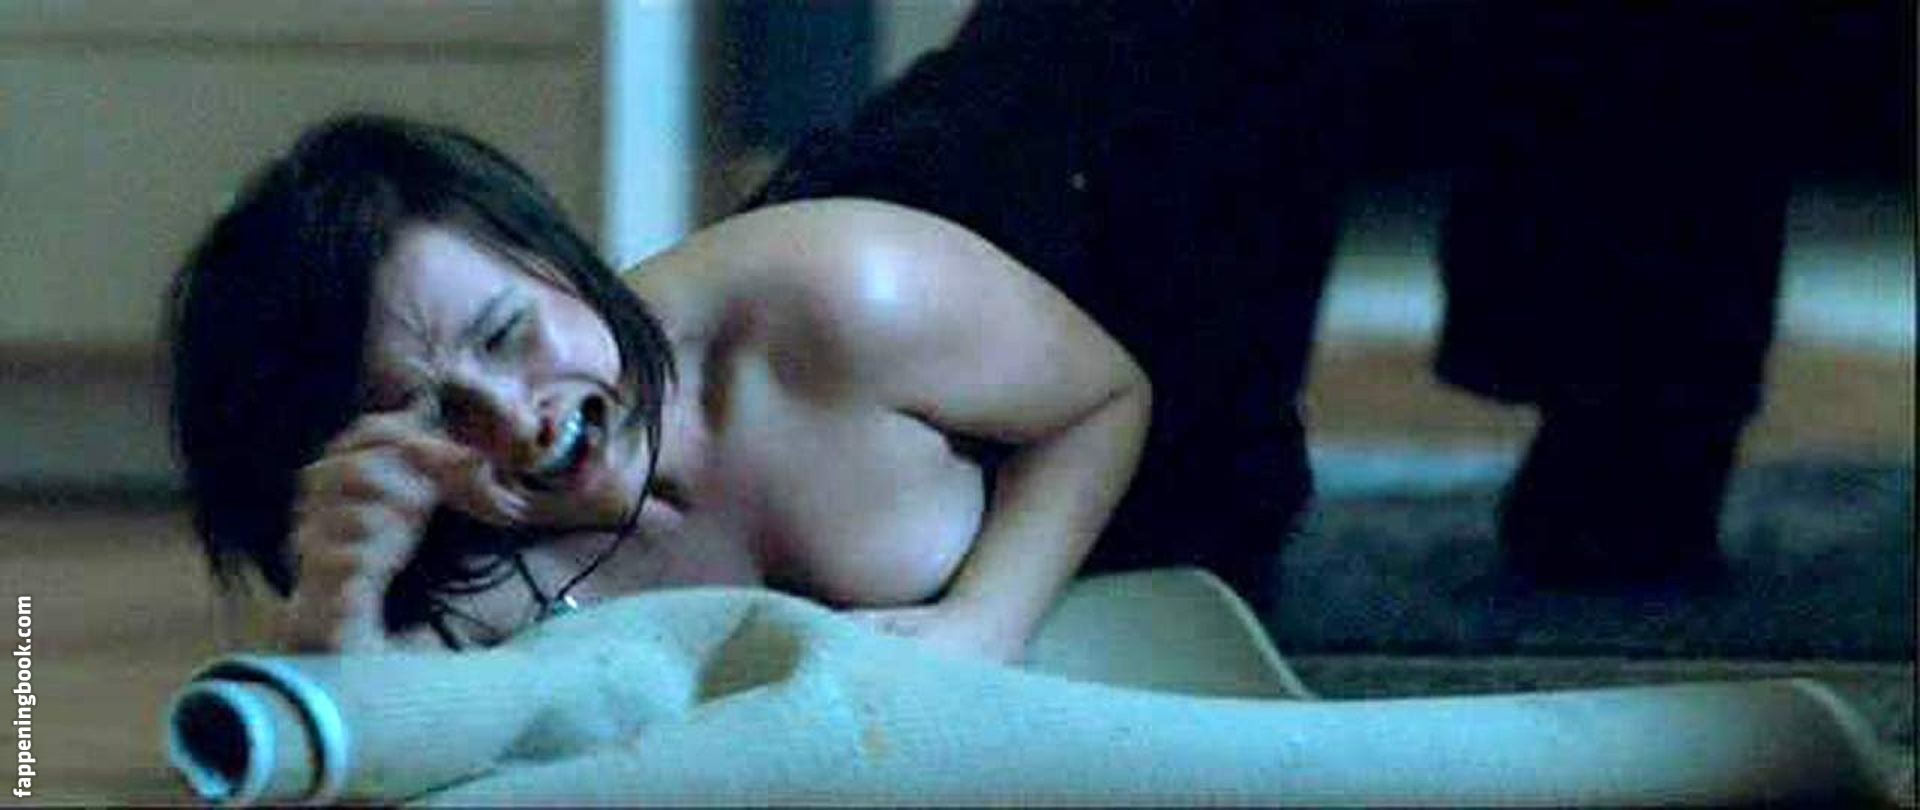 Danielle Harris Nude, The Fappening - Photo #1013418 - FappeningBook.